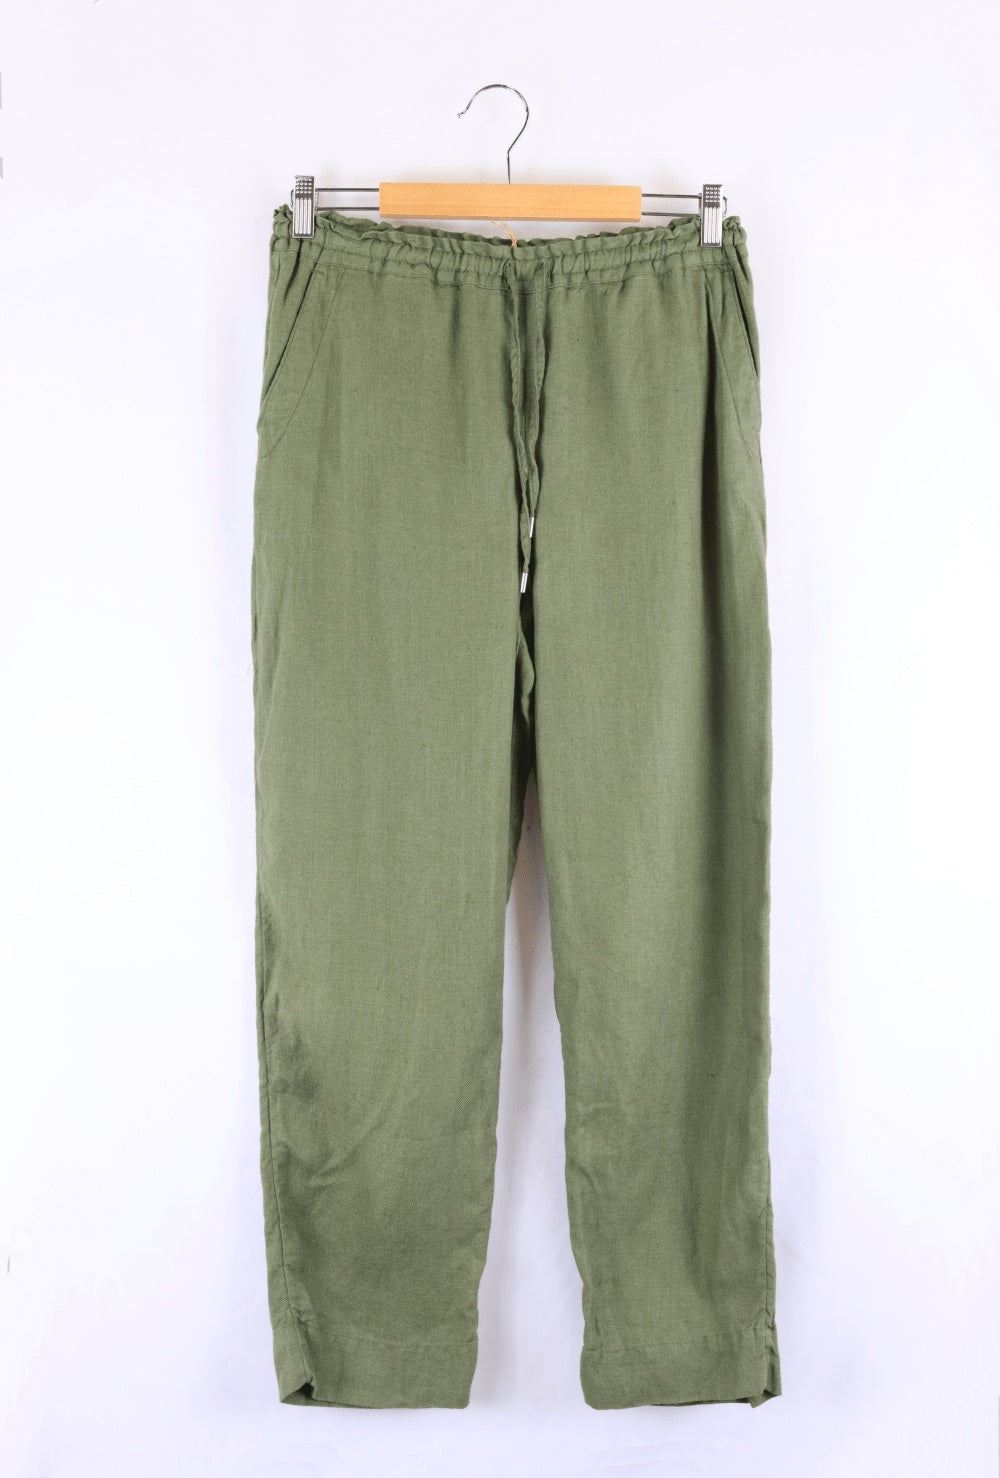 Country Road Green Pants 6